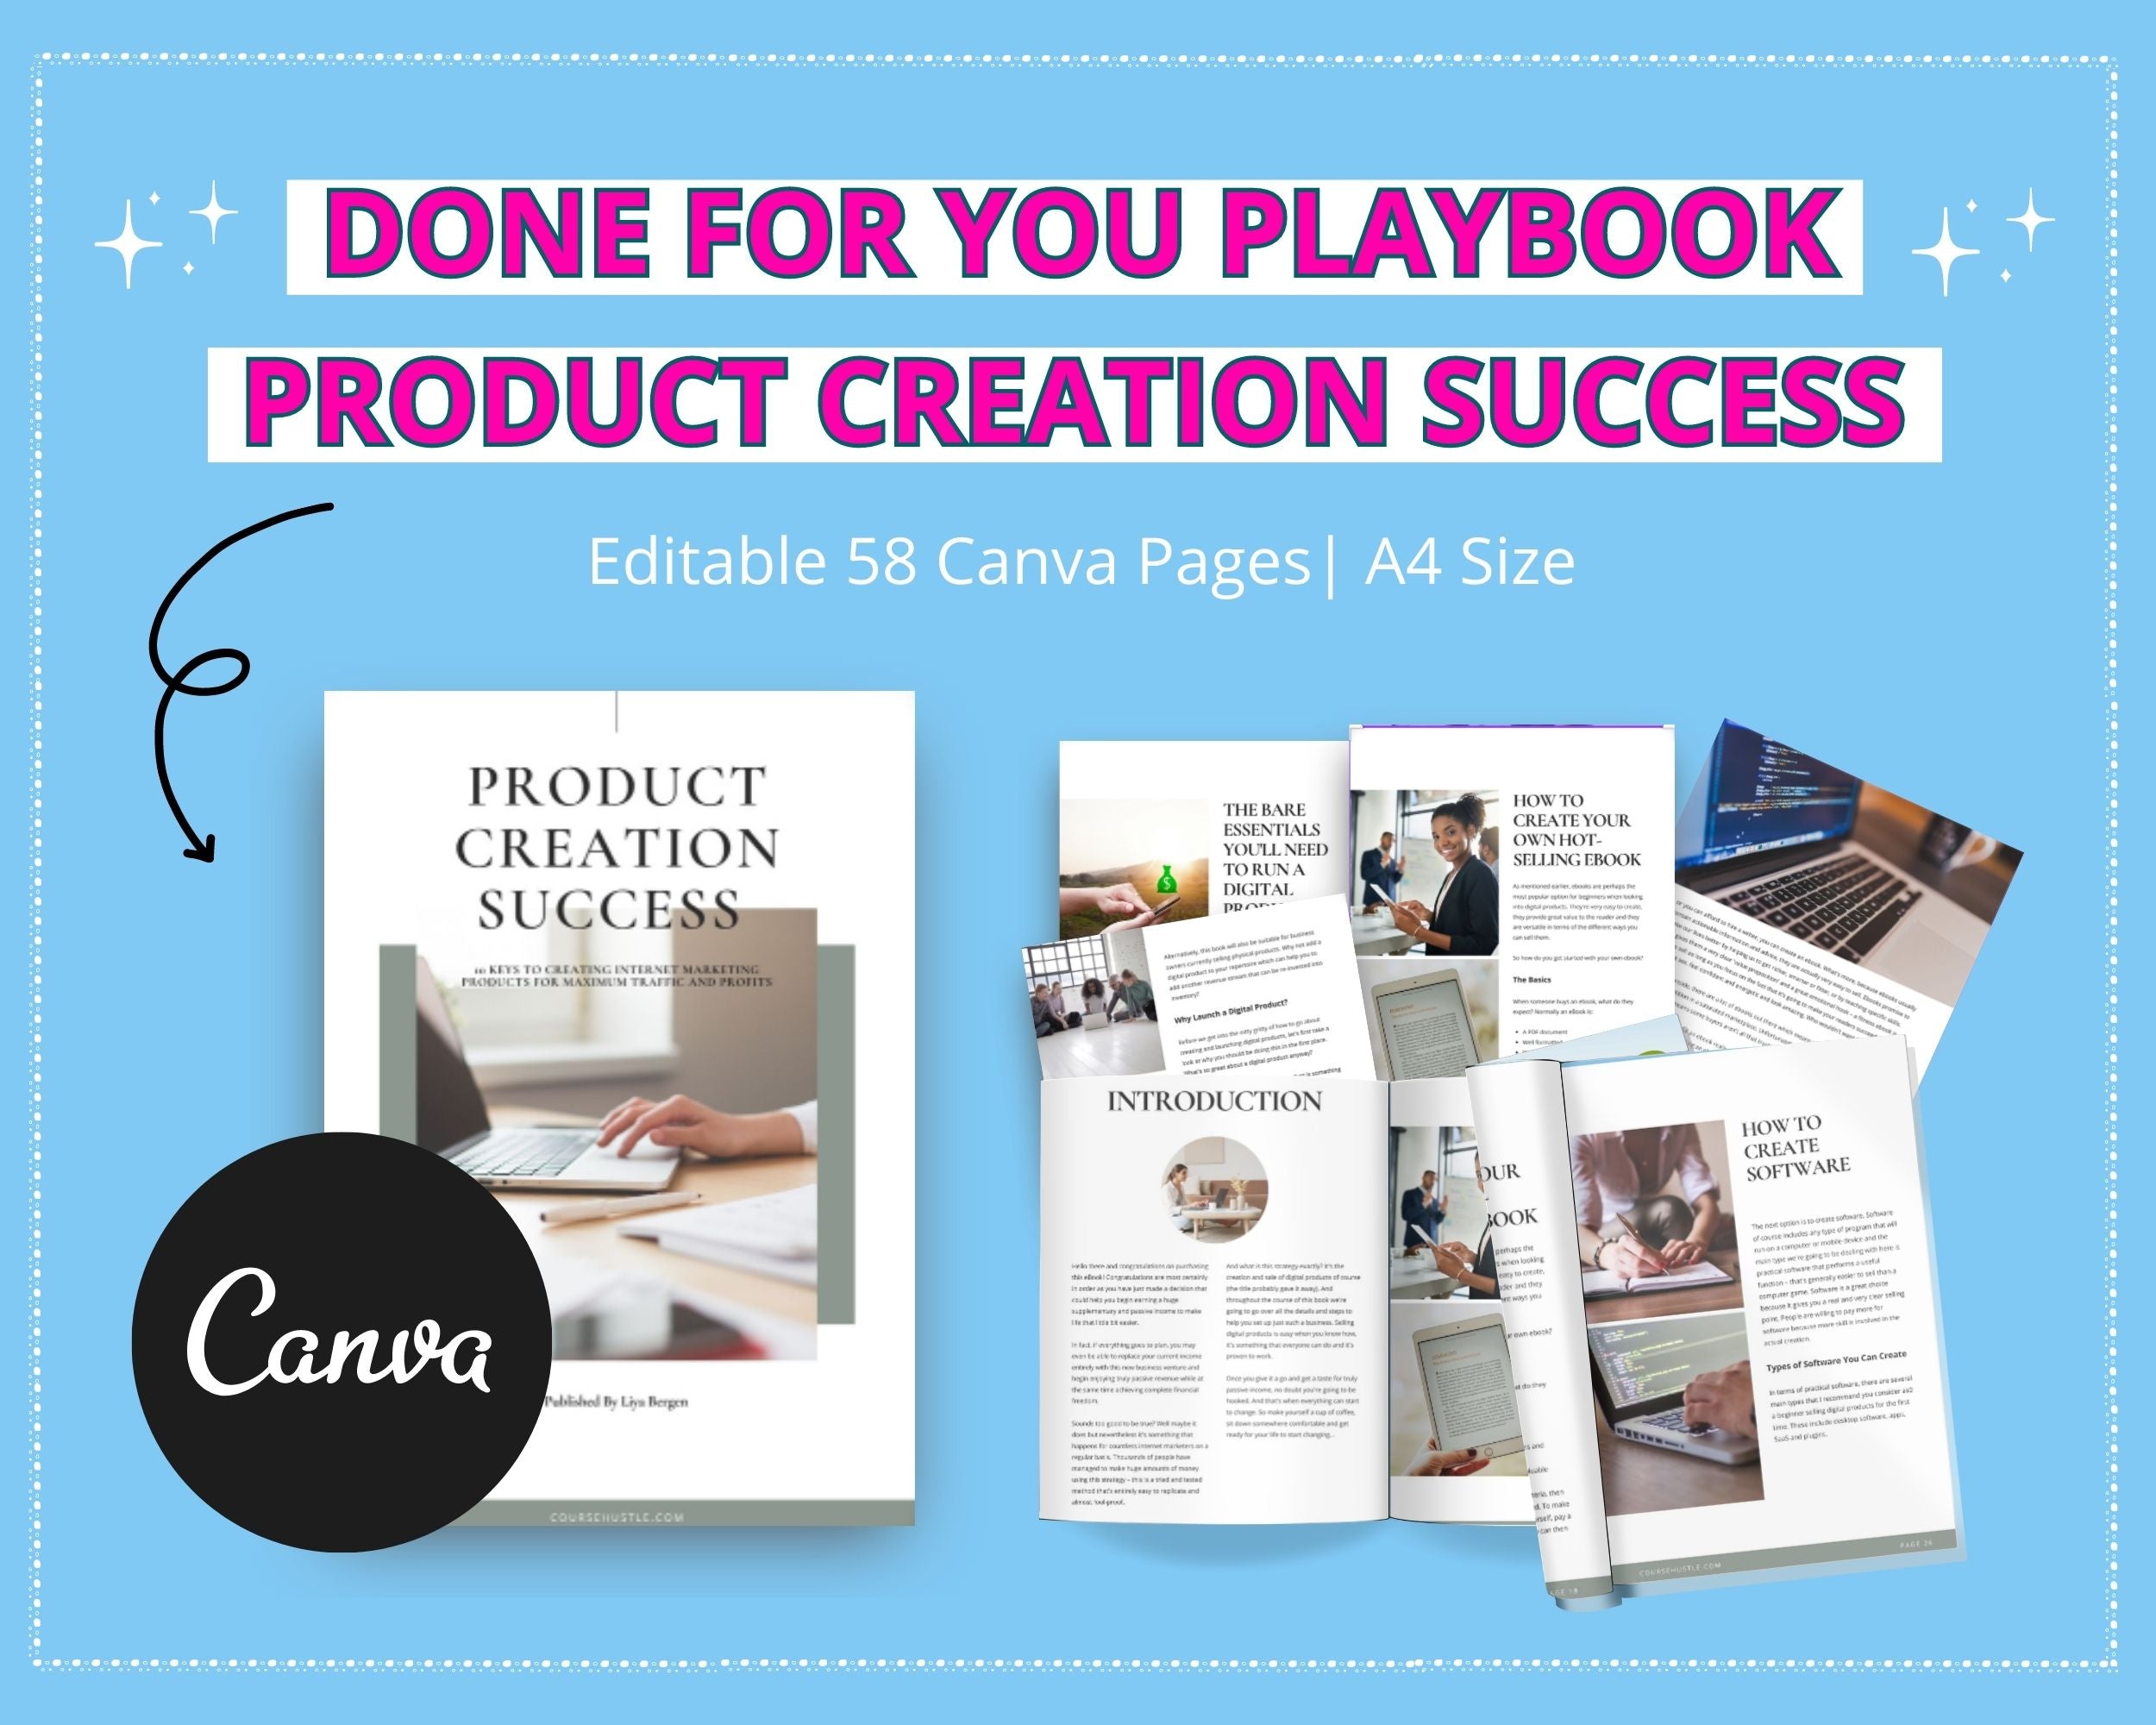 Done for You Product Creation Success Playbook in Canva | Editable A4 Size Canva Template